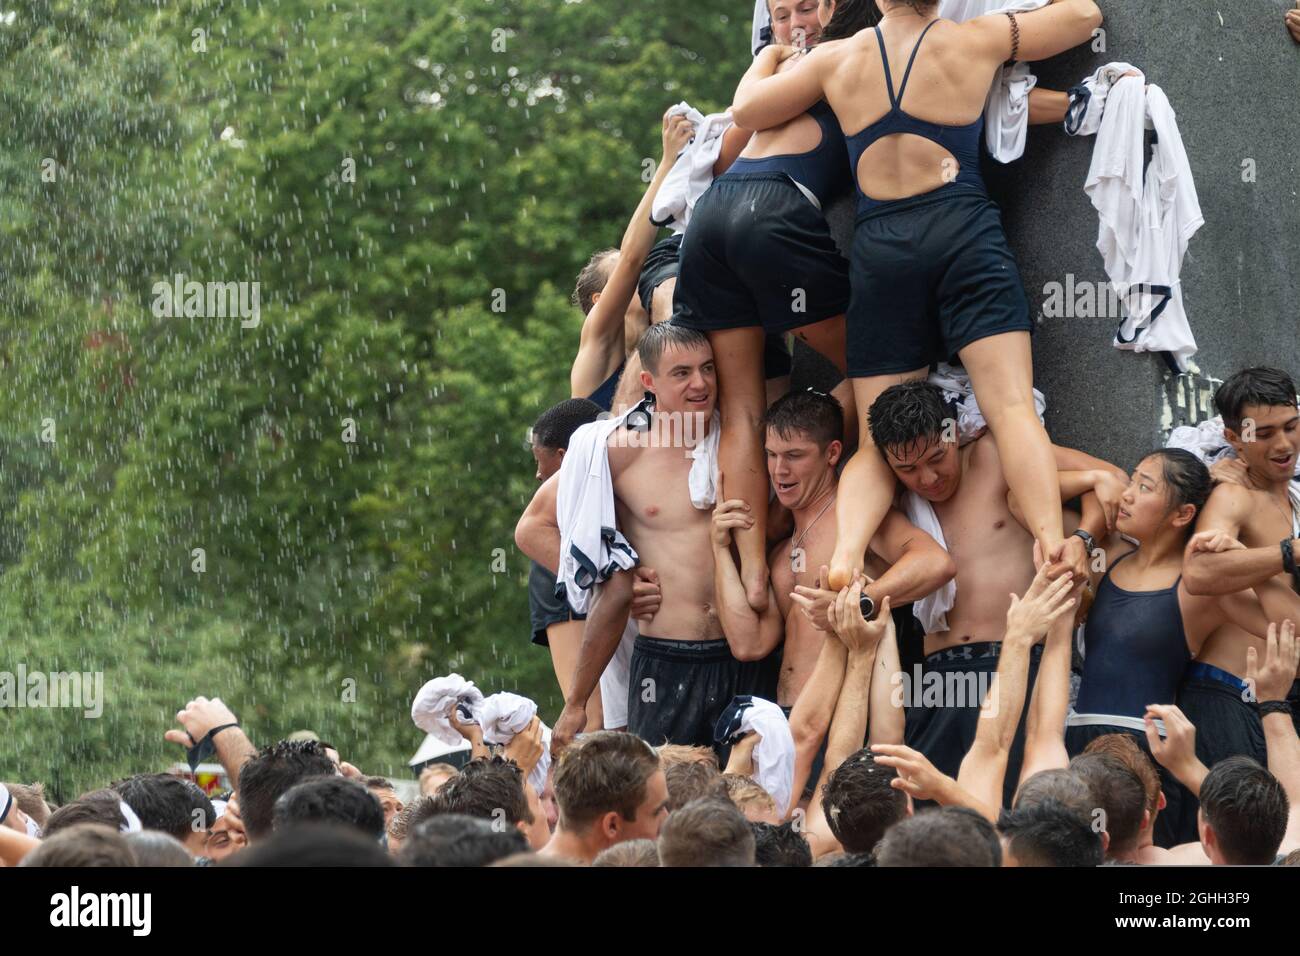 U.S Naval Academy midshipmen from the 2023 class struggle to climb the greased Herndon Monument to retrieve a hat symbolizing the successful completion of the freshman year August 22, 2021 in Annapolis, Maryland. Due to restrictions set forth by the COVID-19 pandemic, the Class of 2023 had to delay the tradition from May to August. Stock Photo